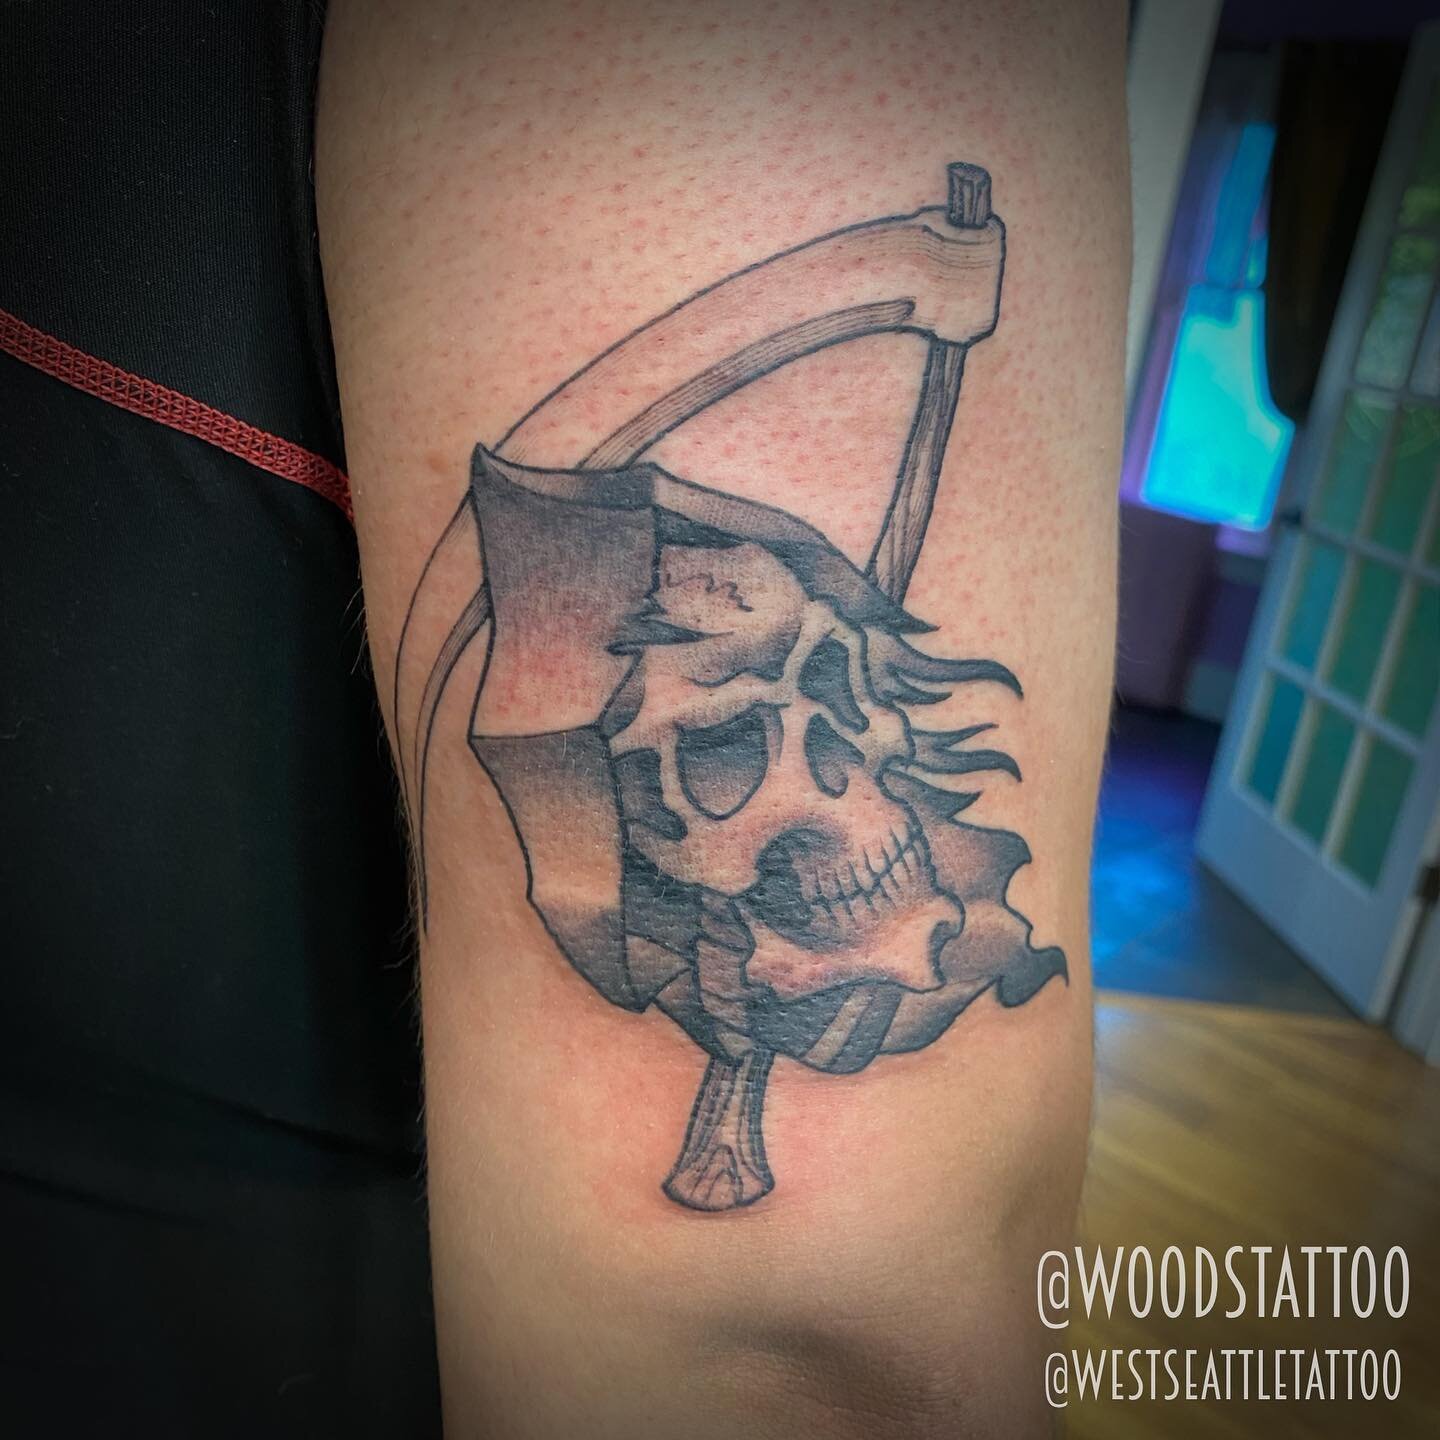 By Woods @woodstattoo Some black &amp; grey bangers from Woods - gotta love those walk-ins!!! Come get yours while they&rsquo;re hit 🔥 #reaper #swallow #walkintattoo 

𝙲𝚘𝚖𝚎 𝚏𝚘𝚛 𝚝𝚑𝚎 𝚝𝚊𝚝𝚝𝚘𝚘𝚜 - 𝚛𝚎𝚝𝚞𝚛𝚗 𝚏𝚘𝚛 𝚝𝚑𝚎 𝚎𝚡𝚙𝚎𝚛𝚒𝚎